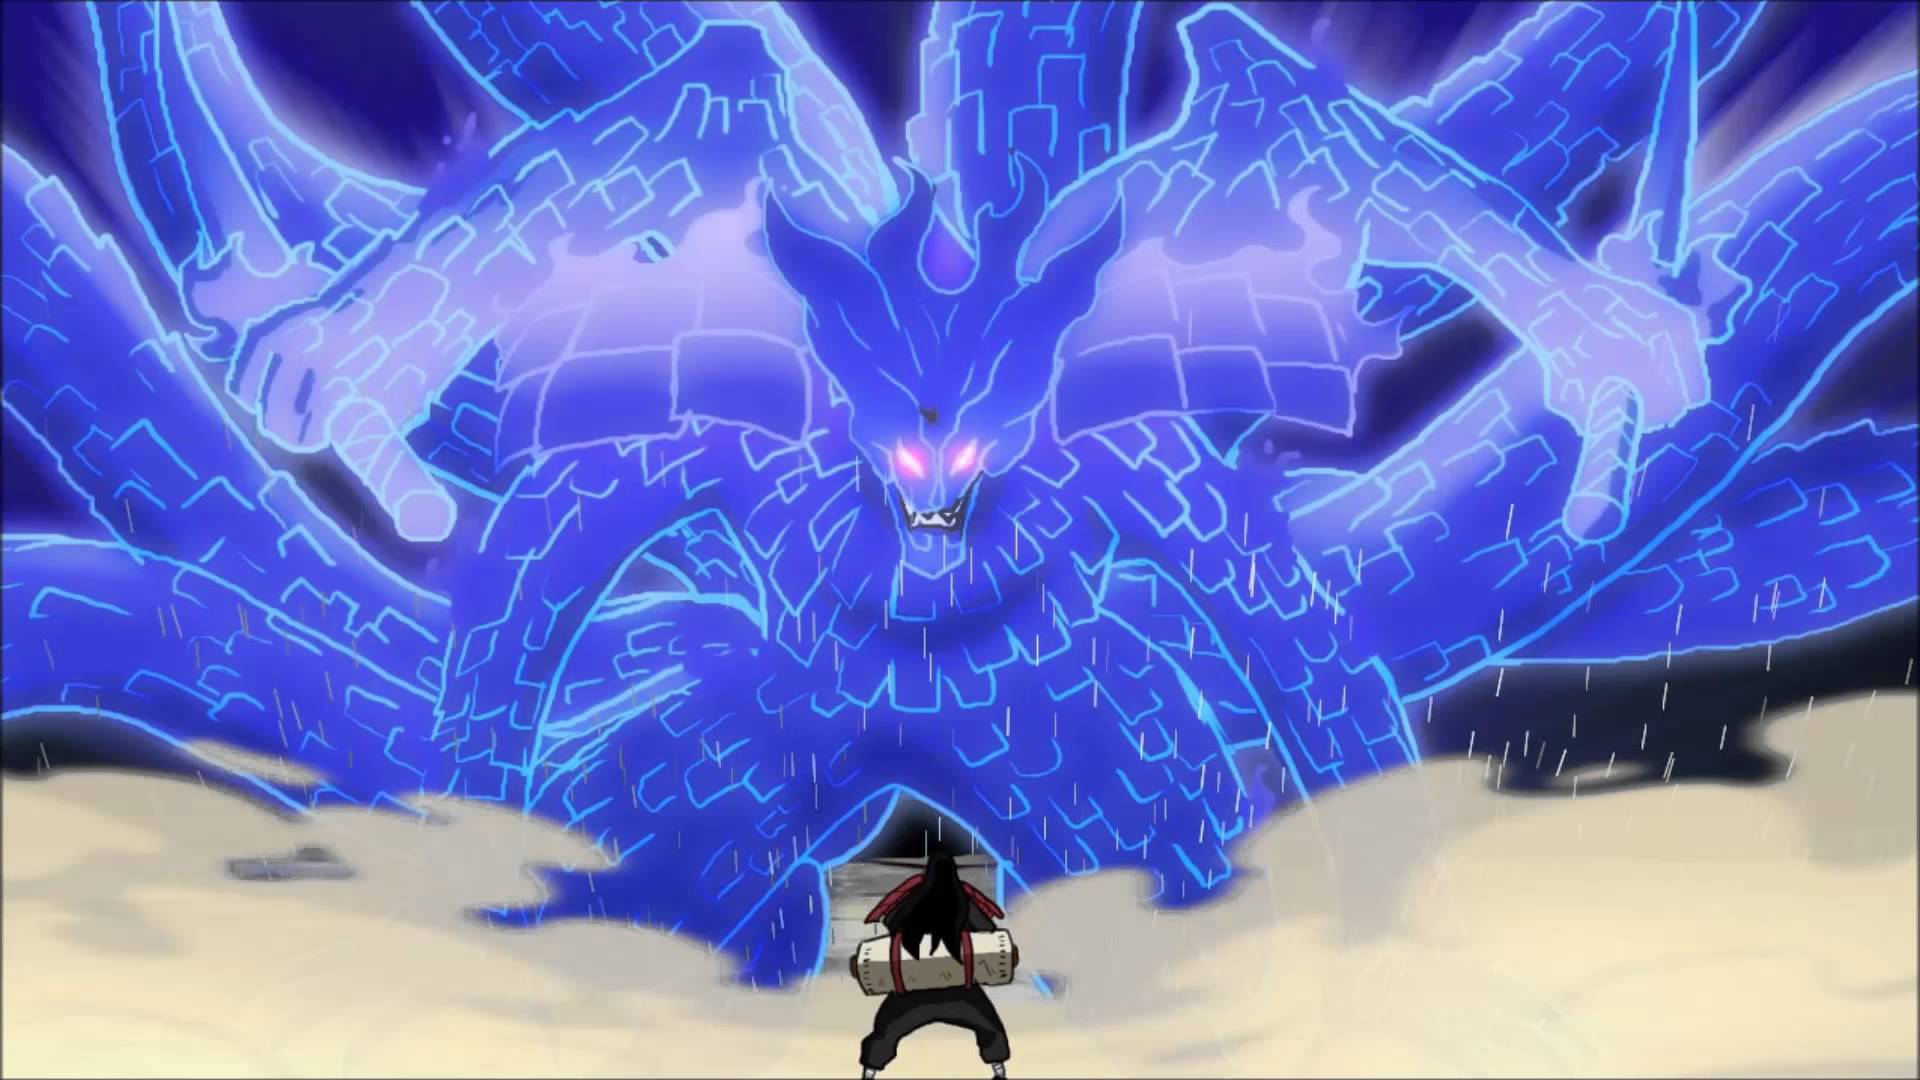 30+ Susanoo (Naruto) HD Wallpapers and Backgrounds